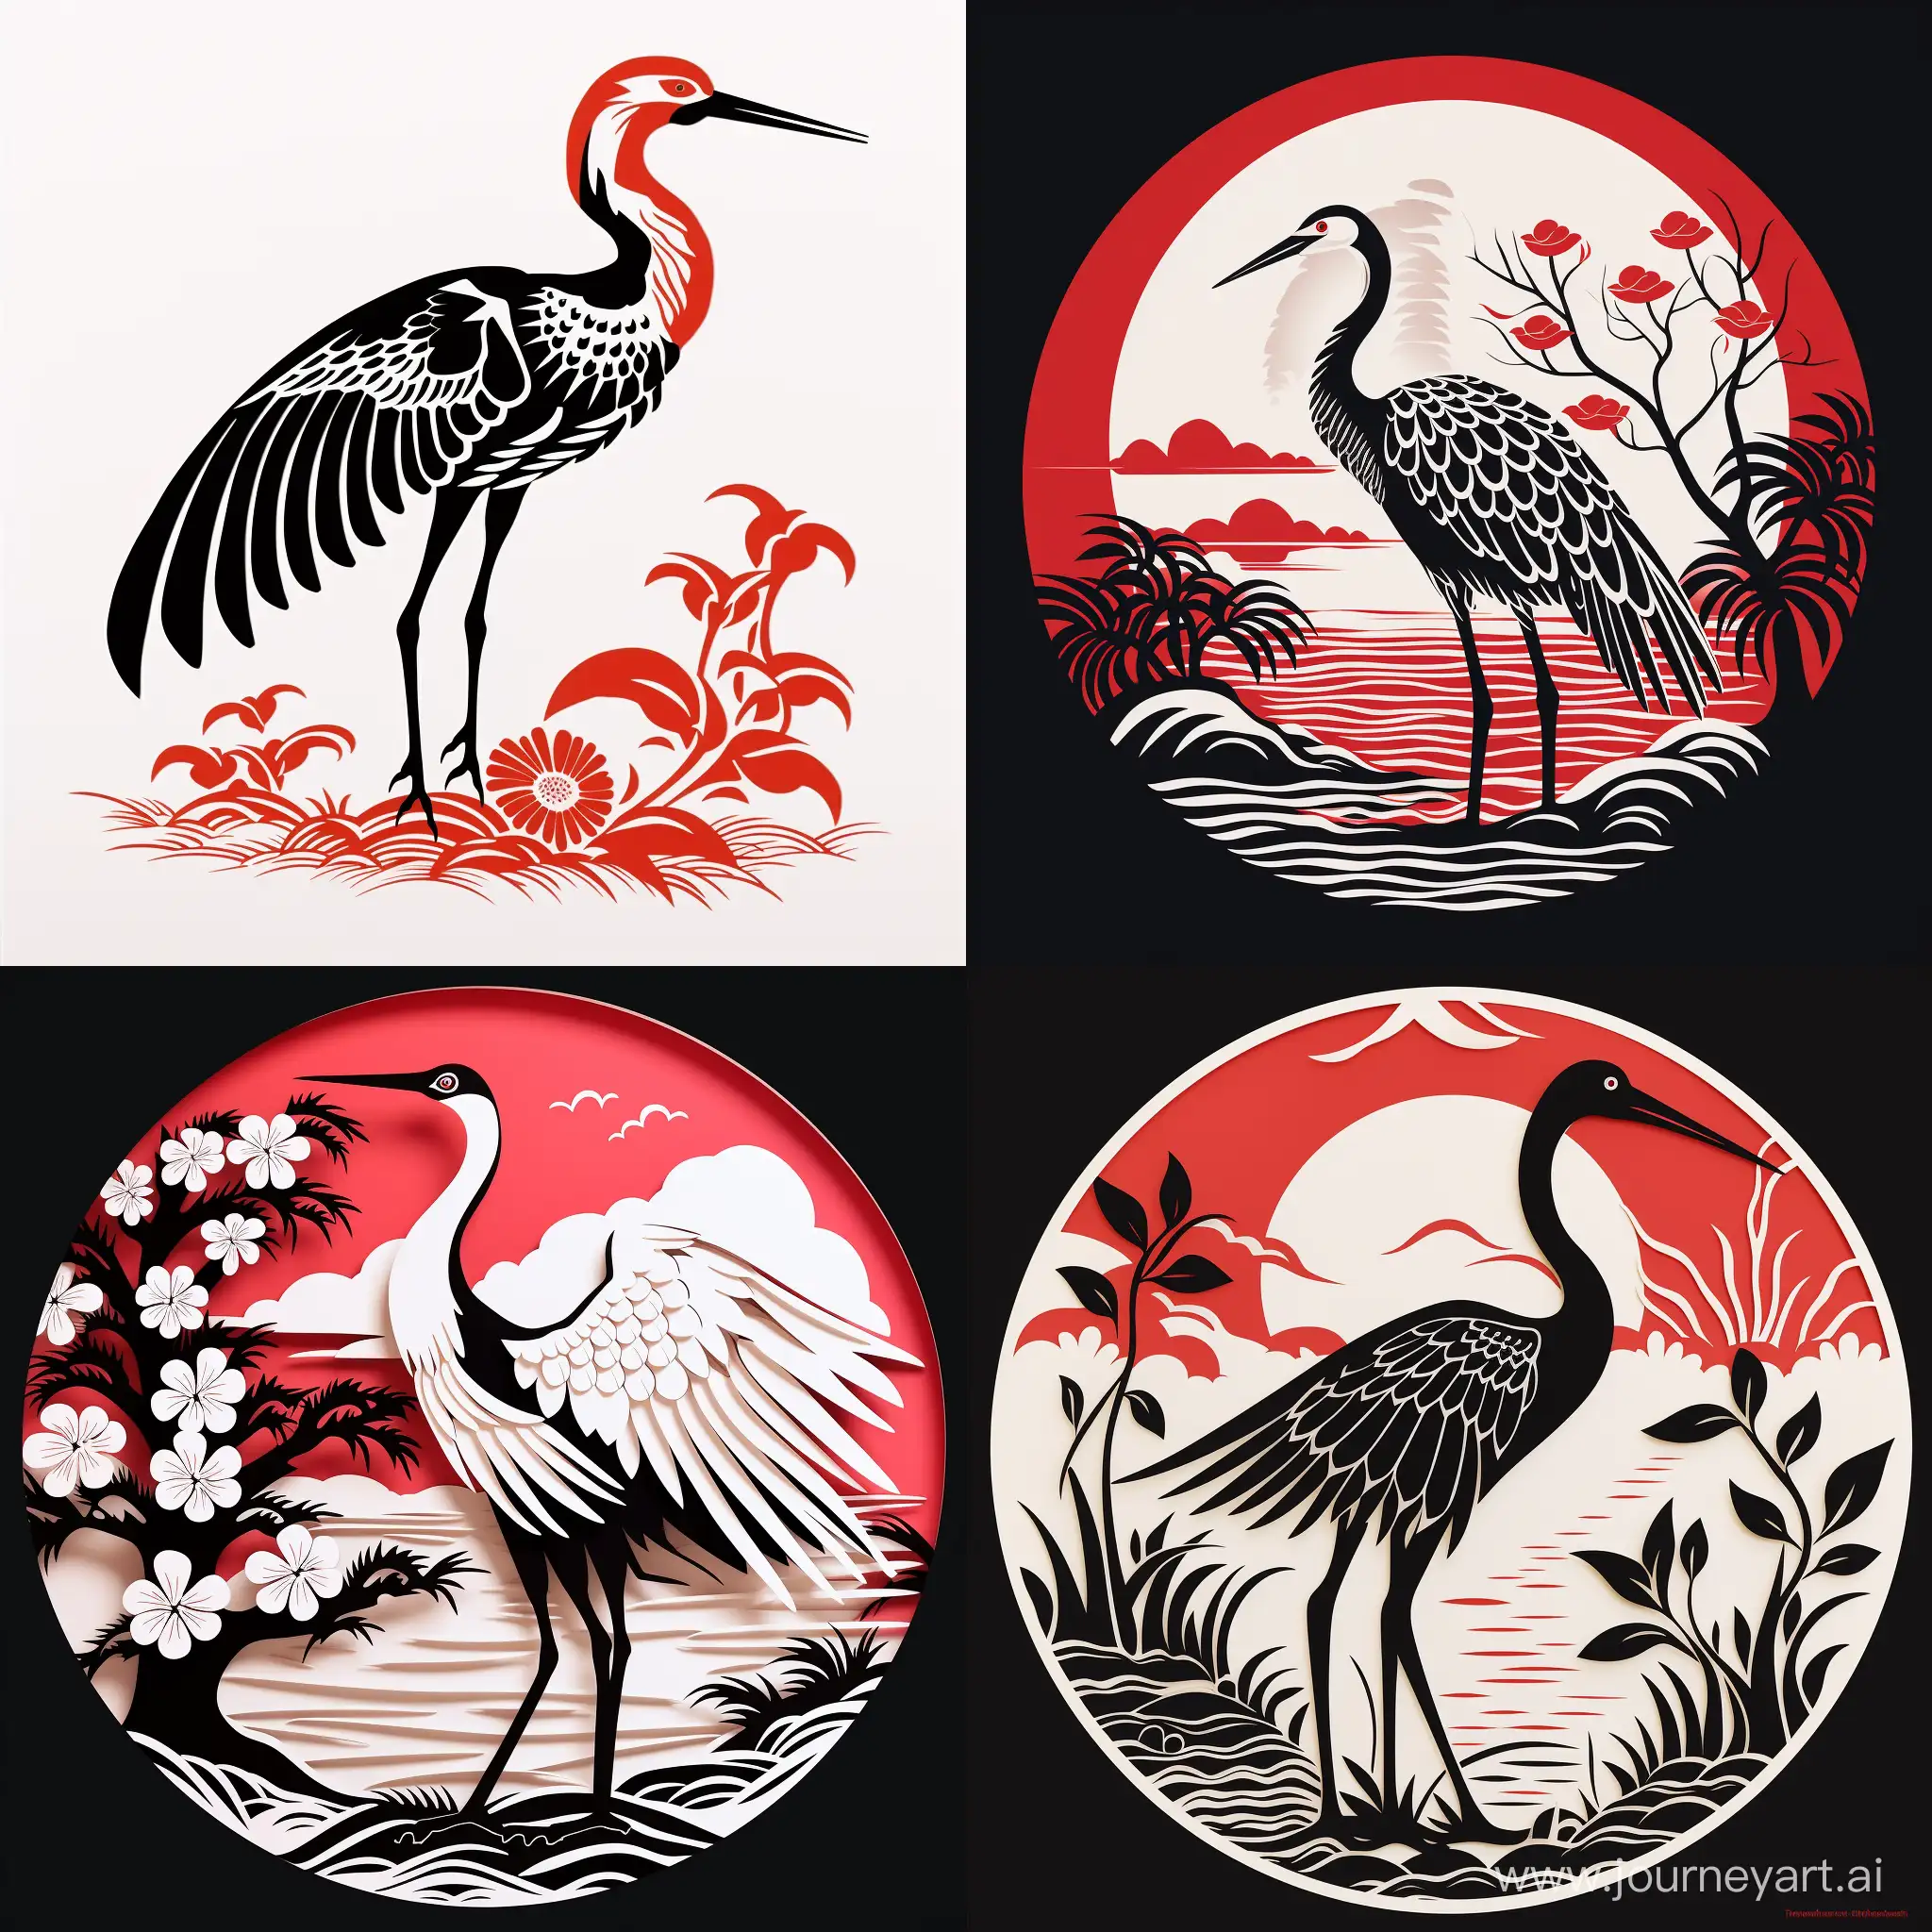 simplicity Chinese paper-cut art, black and red and white color, The crane, simplicity, simple, american logo style --v 5.2
